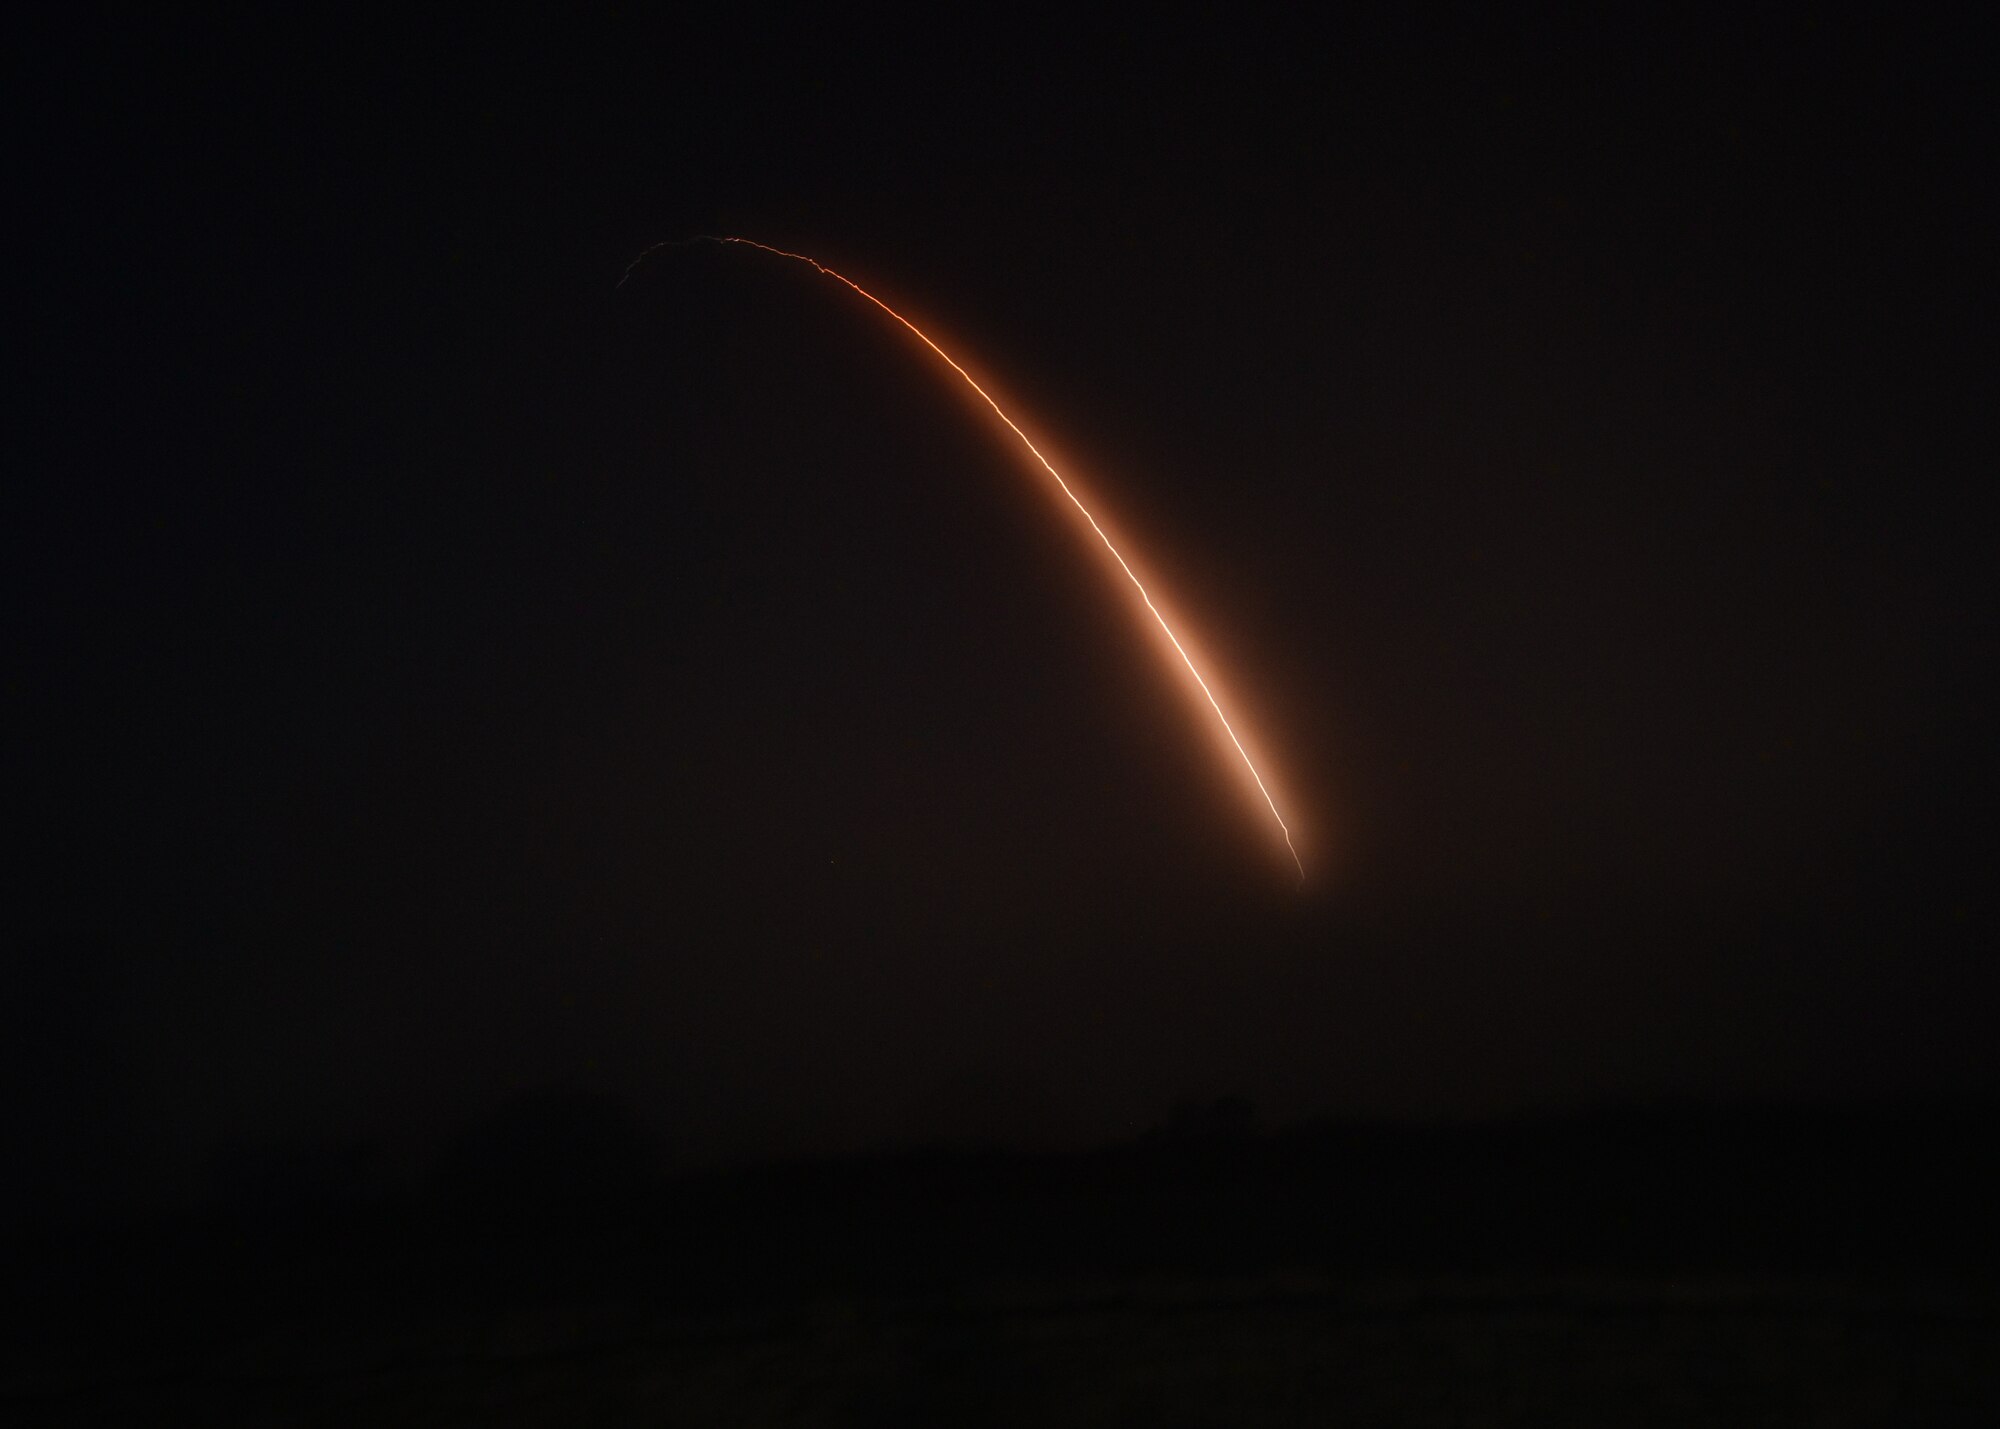 An Air Force Global Strike Command unarmed Minuteman III intercontinental ballistic missile launches during an operational test at 12:49 A.M. PDT Tuesday 16 Aug, 2022 at Vandenberg Space Force Base, Calif. ICBM test launches demonstrate that the U.S. ICBM fleet is relevant, essential and key to leveraging dominance in an era of strategic competition. (U.S. Air Force photo by Airman 1st Class Ryan Quijas)